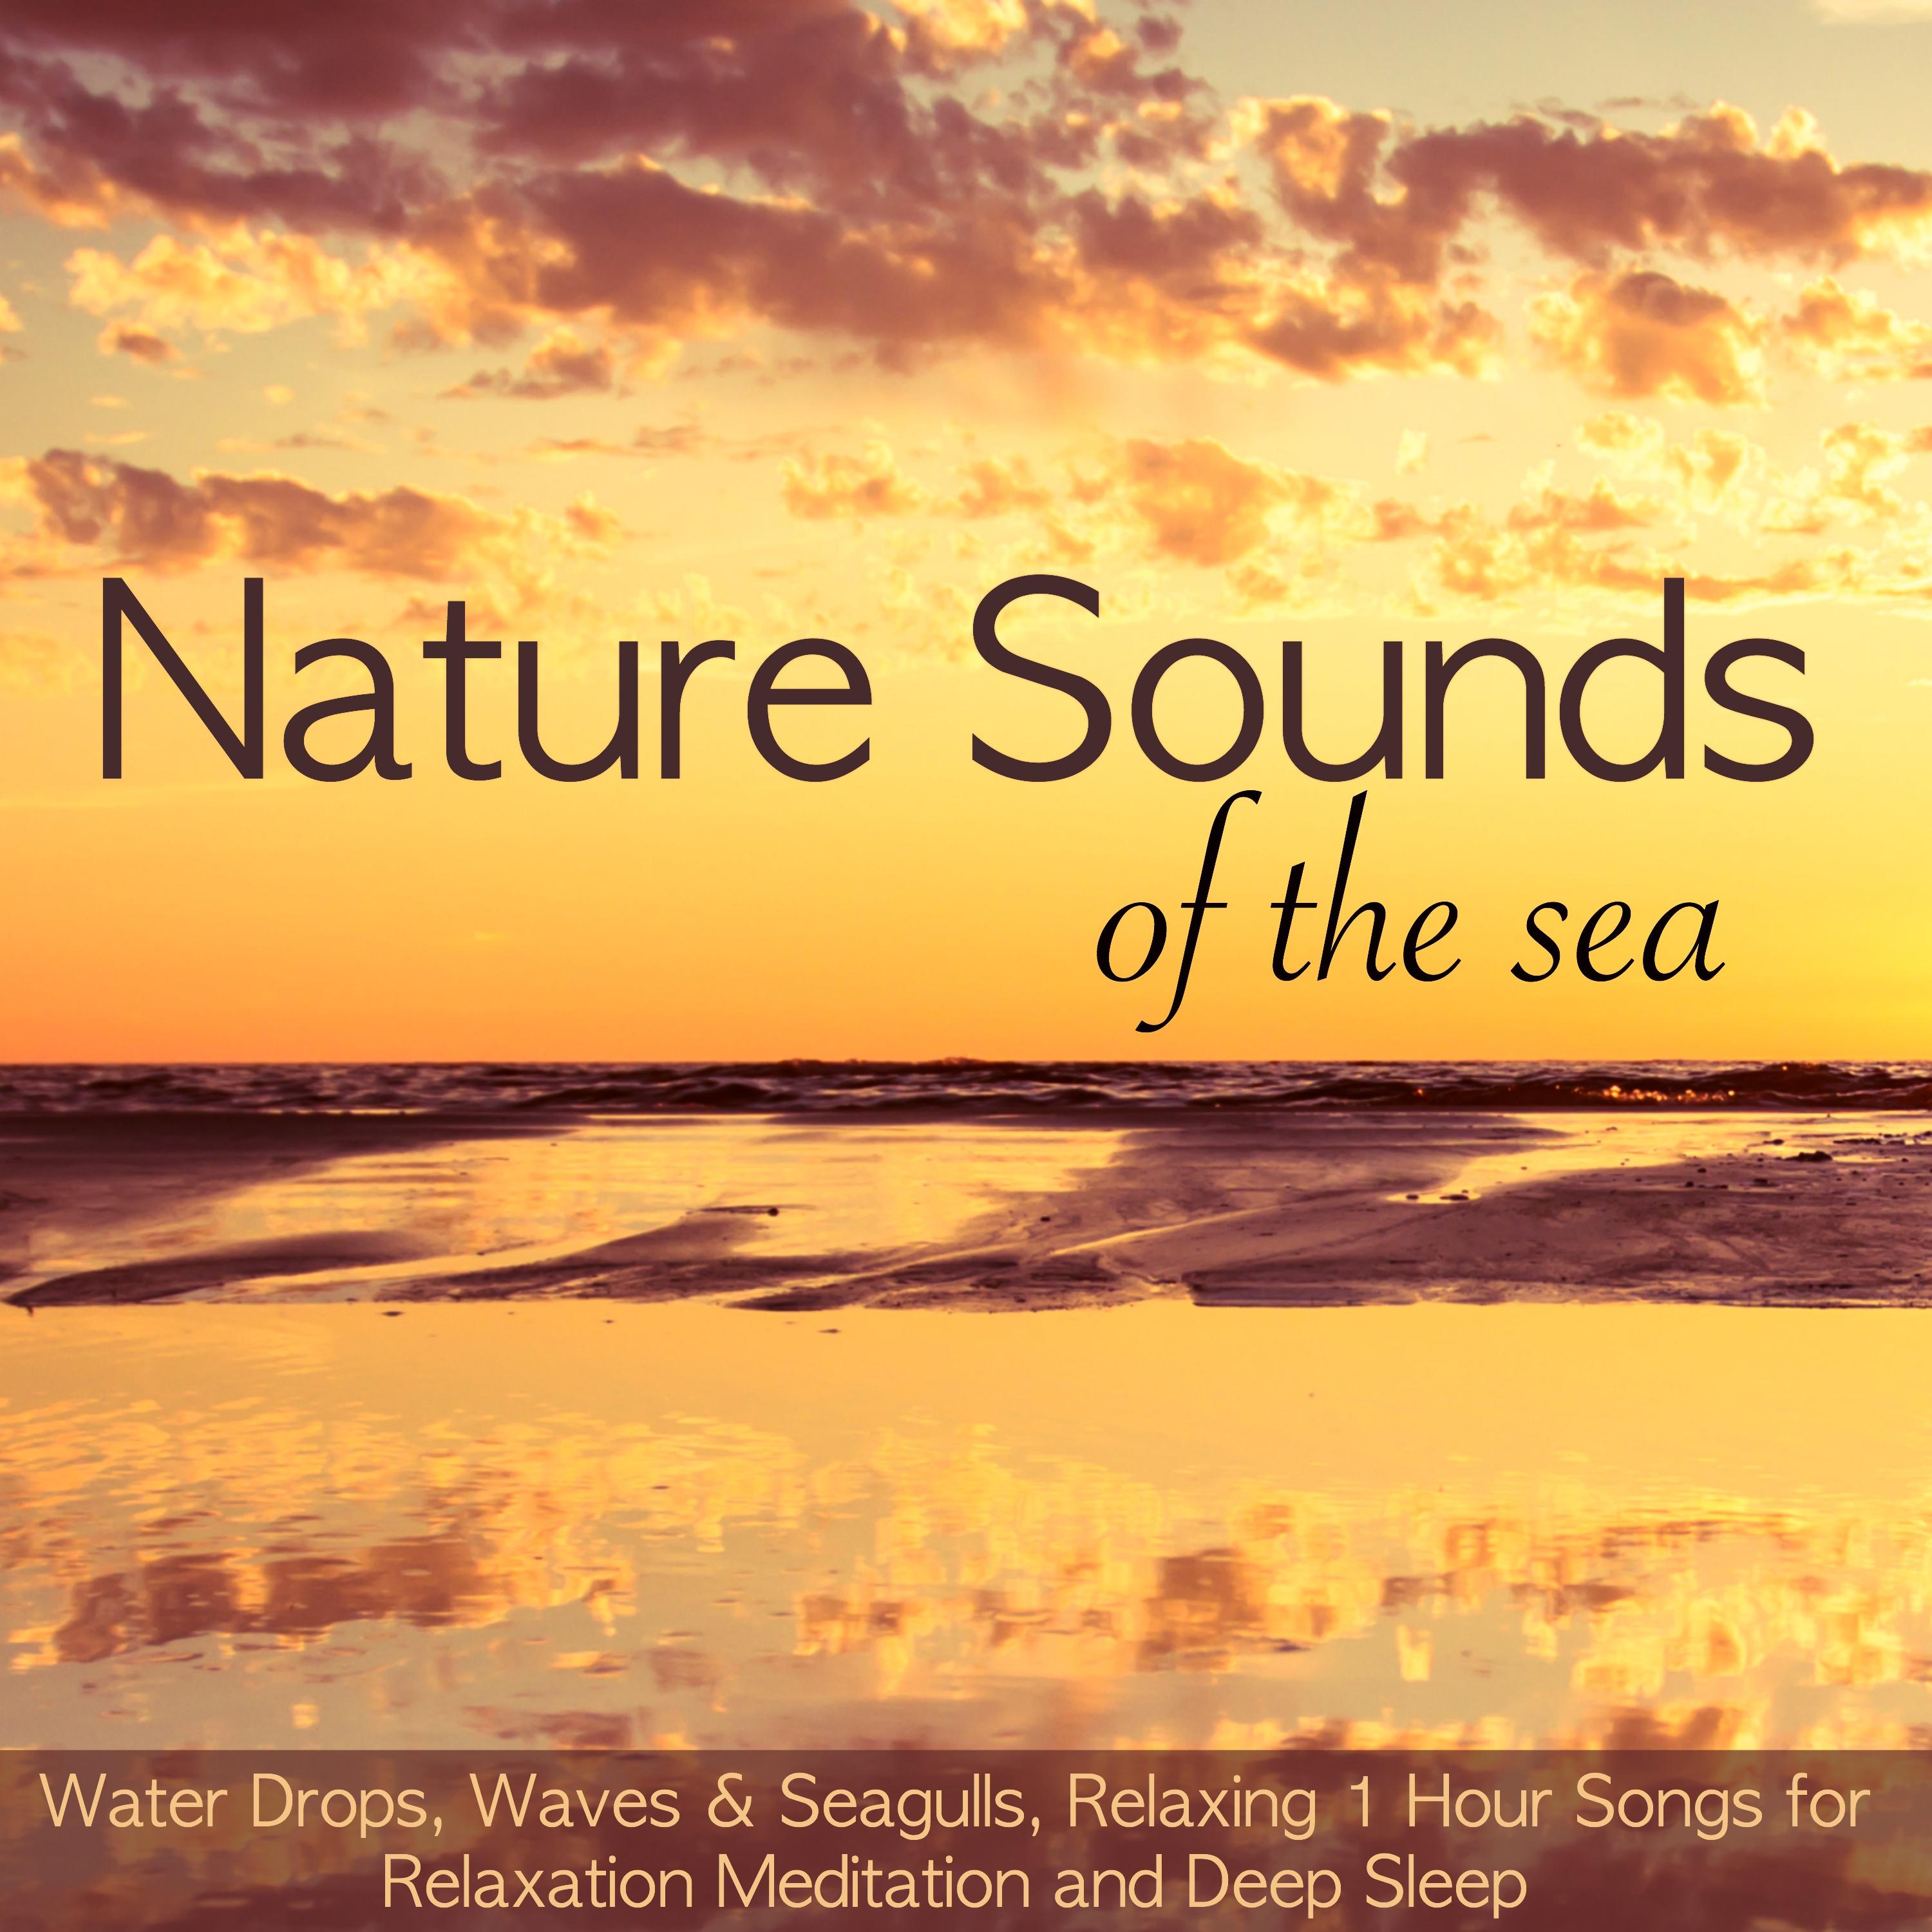 Nature Sounds of the Sea –  Water Drops, Waves & Seagulls, Relaxing 1 Hour Songs for Relaxation Meditation and Deep Sleep